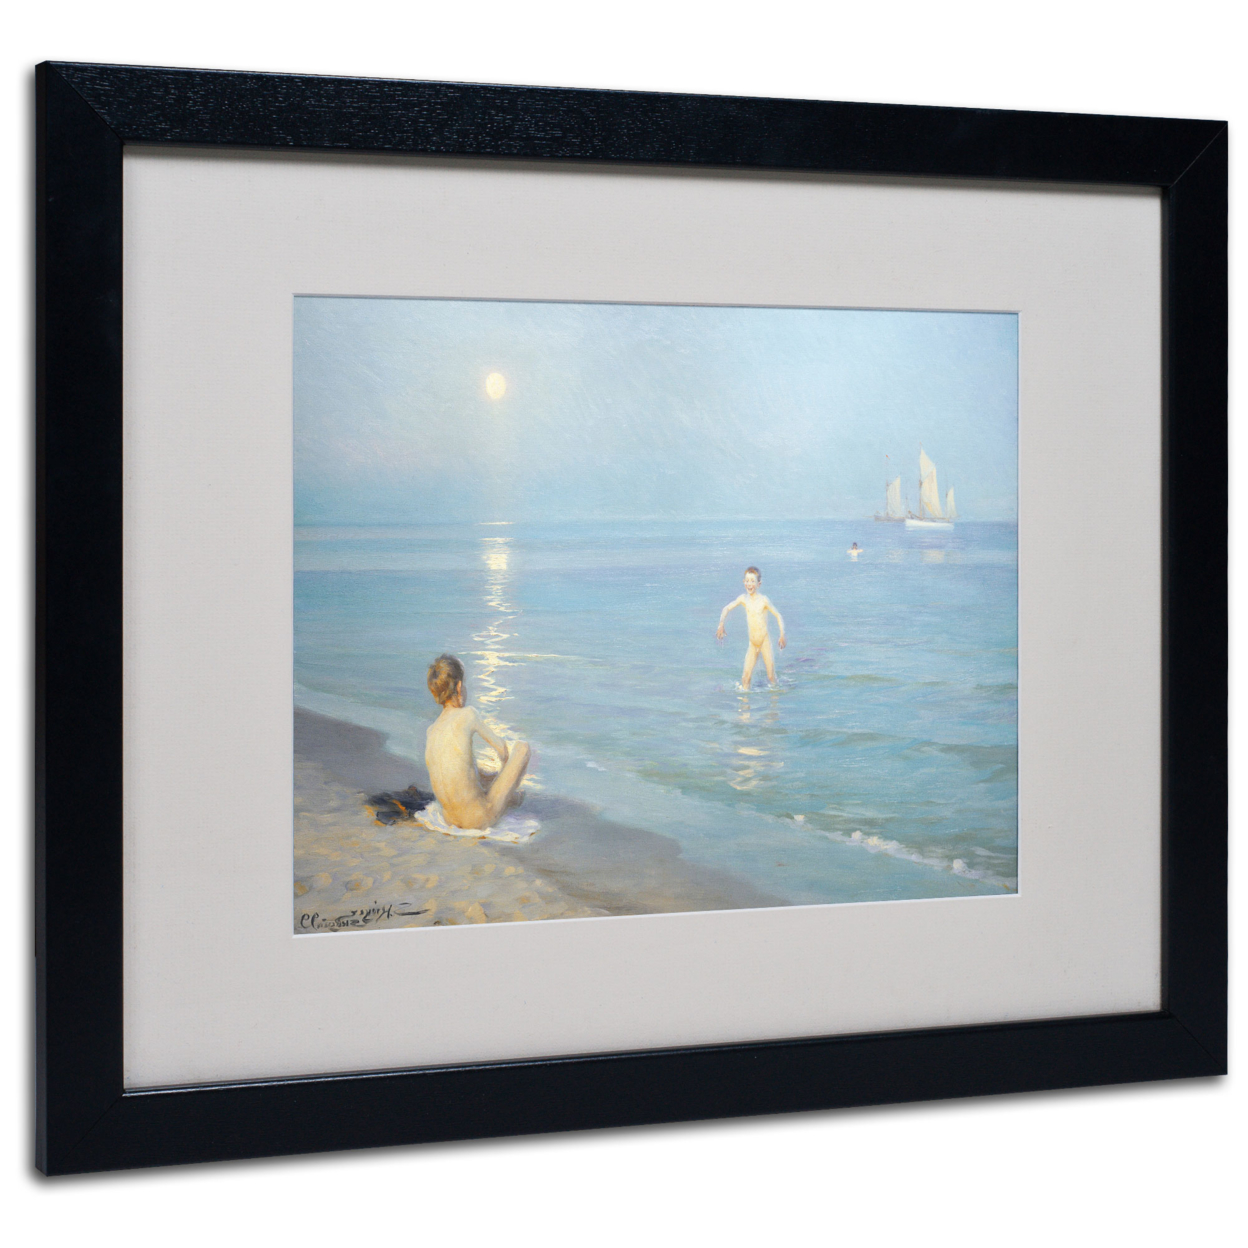 Boys On The Seashore In A Summer Night' Black Wooden Framed Art 18 X 22 Inches